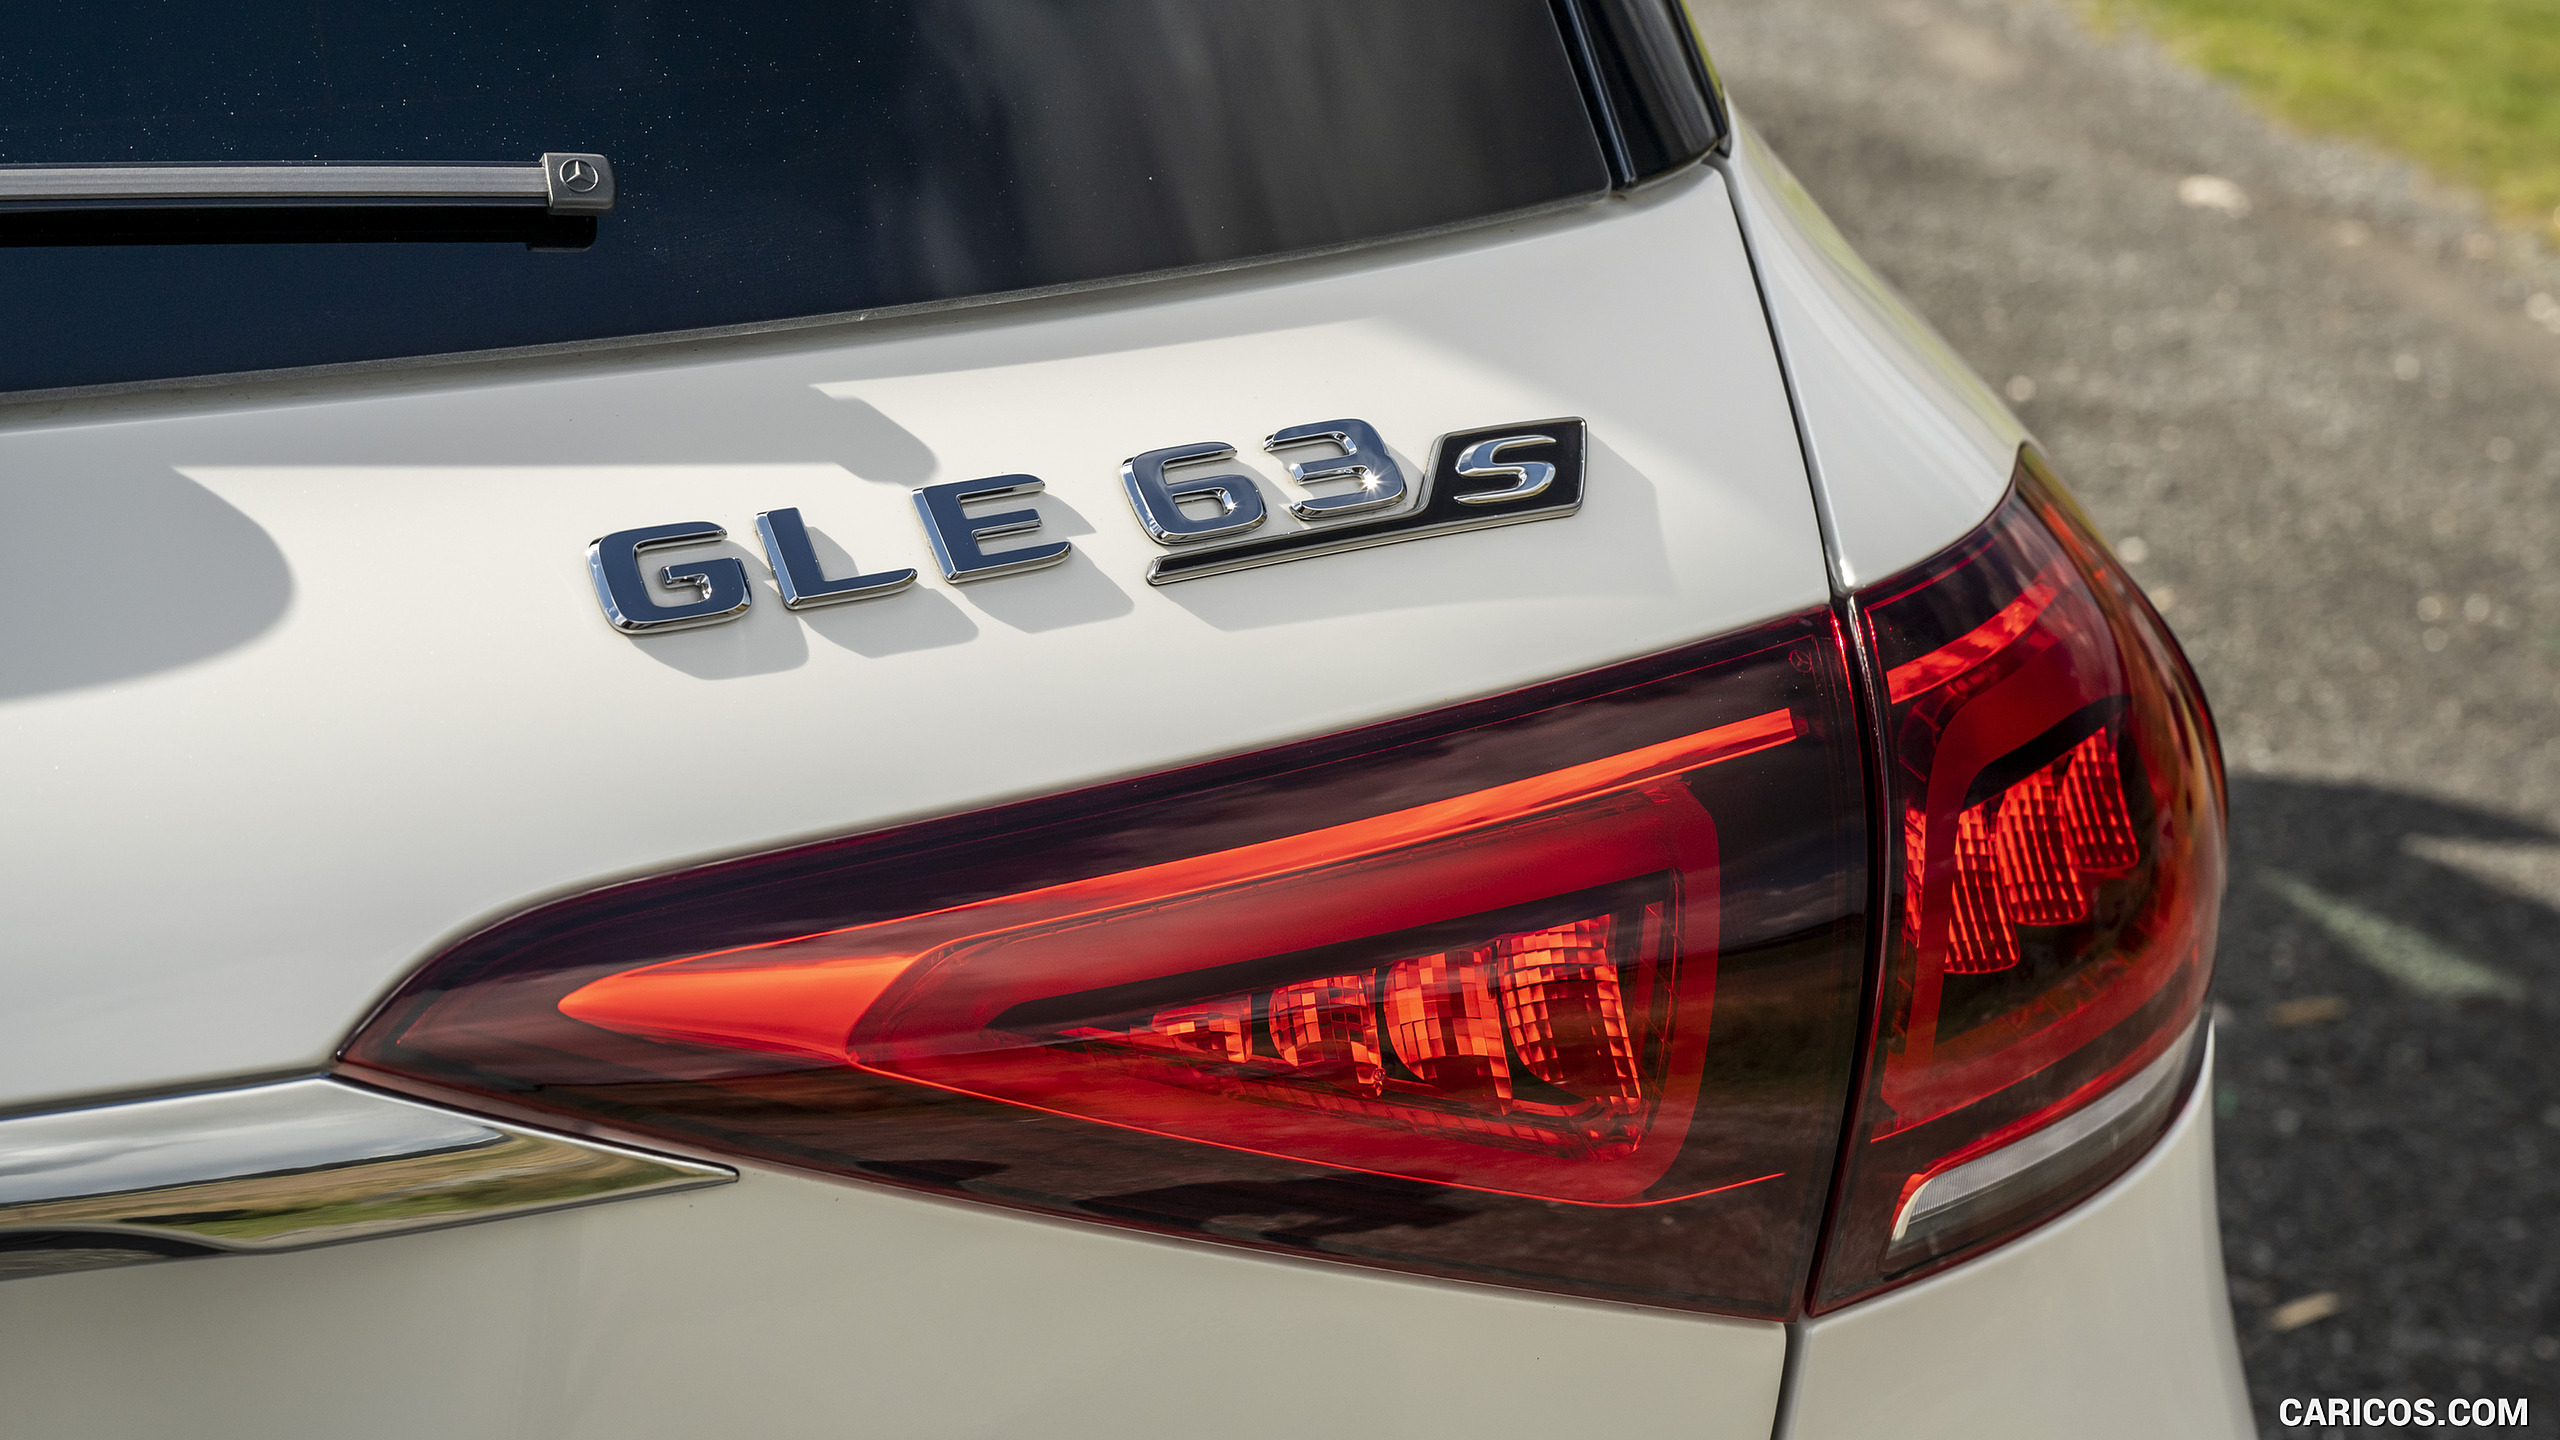 2021 Mercedes-AMG GLE 63 S 4MATIC (UK-Spec) - Tail Light, #155 of 187